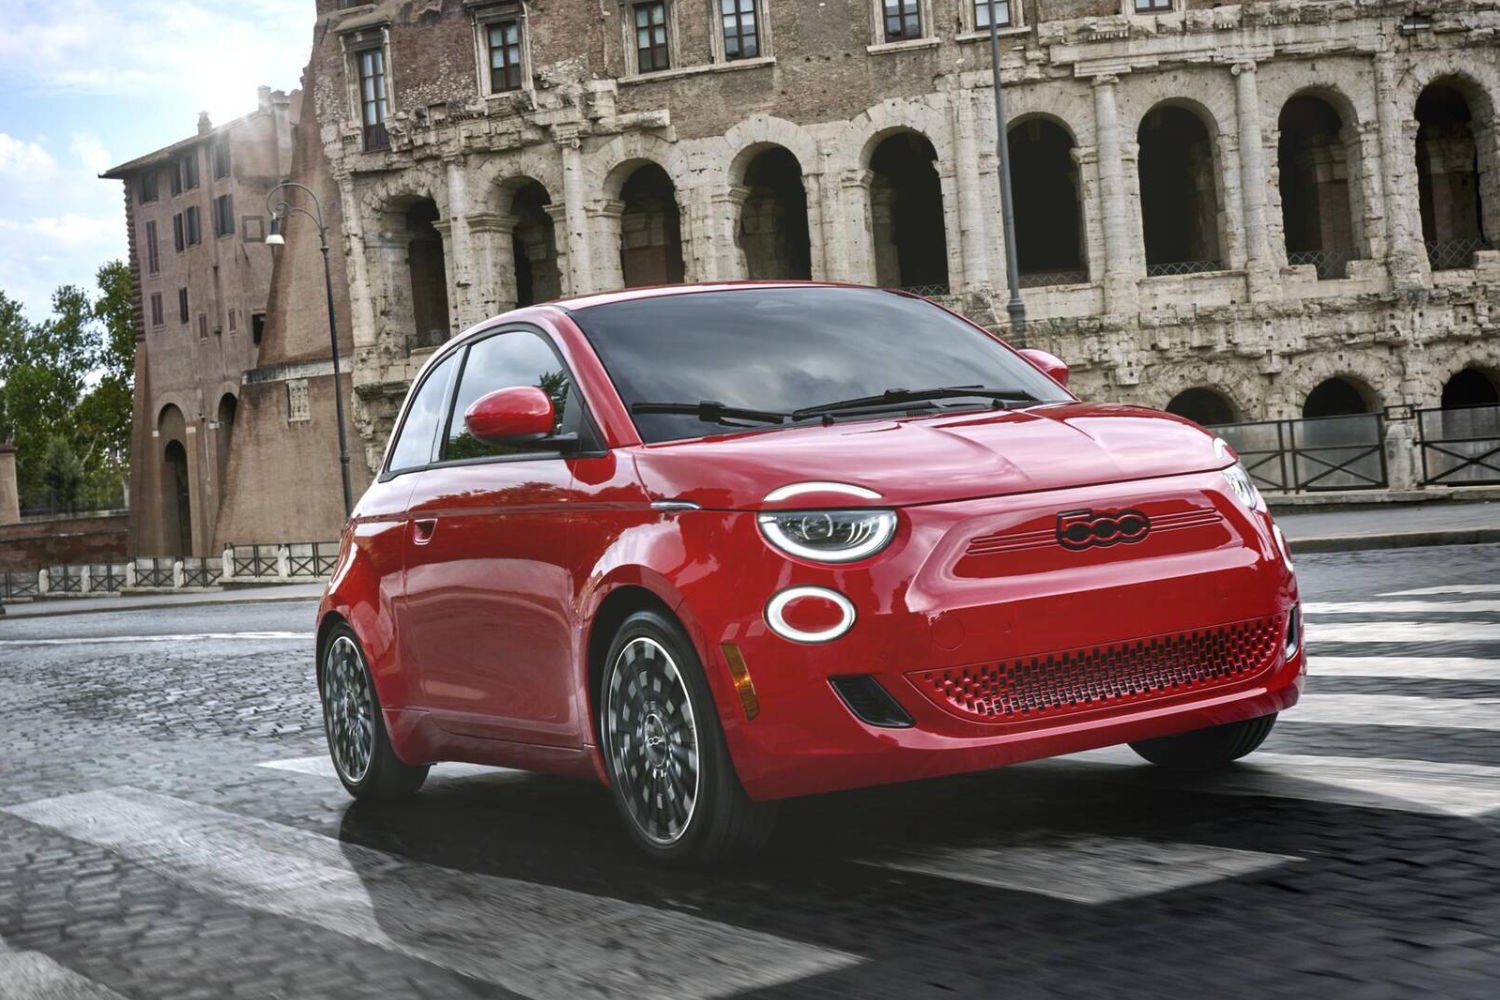 Why should the Fiat 500 return to a thermal engine before summer?